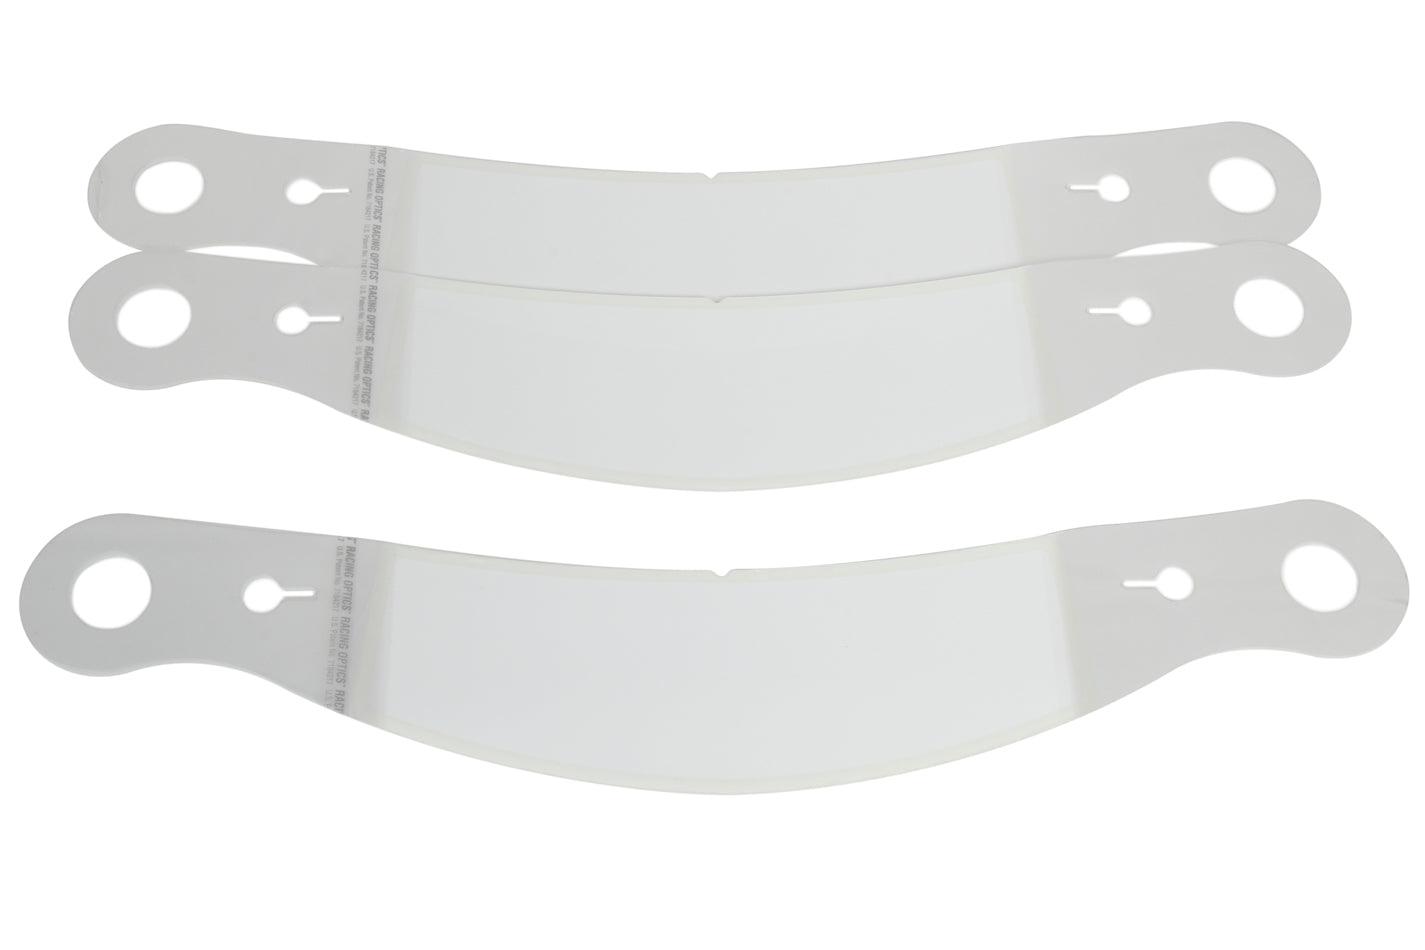 Perimeter Tearoff Bell SE03 And SE05 Shields - Burlile Performance Products